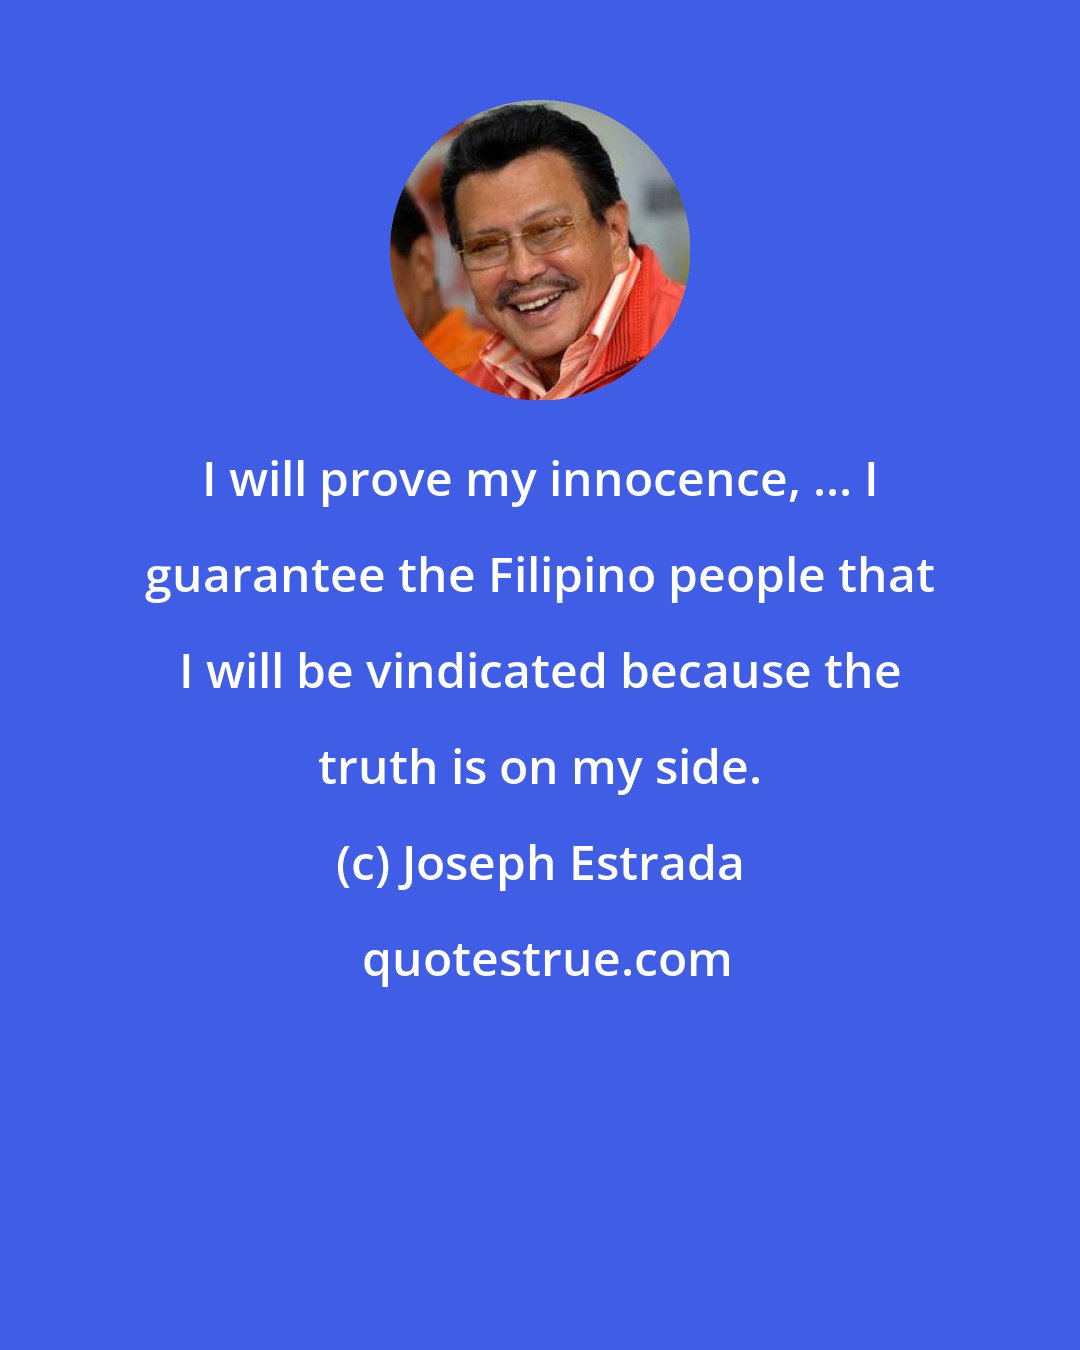 Joseph Estrada: I will prove my innocence, ... I guarantee the Filipino people that I will be vindicated because the truth is on my side.